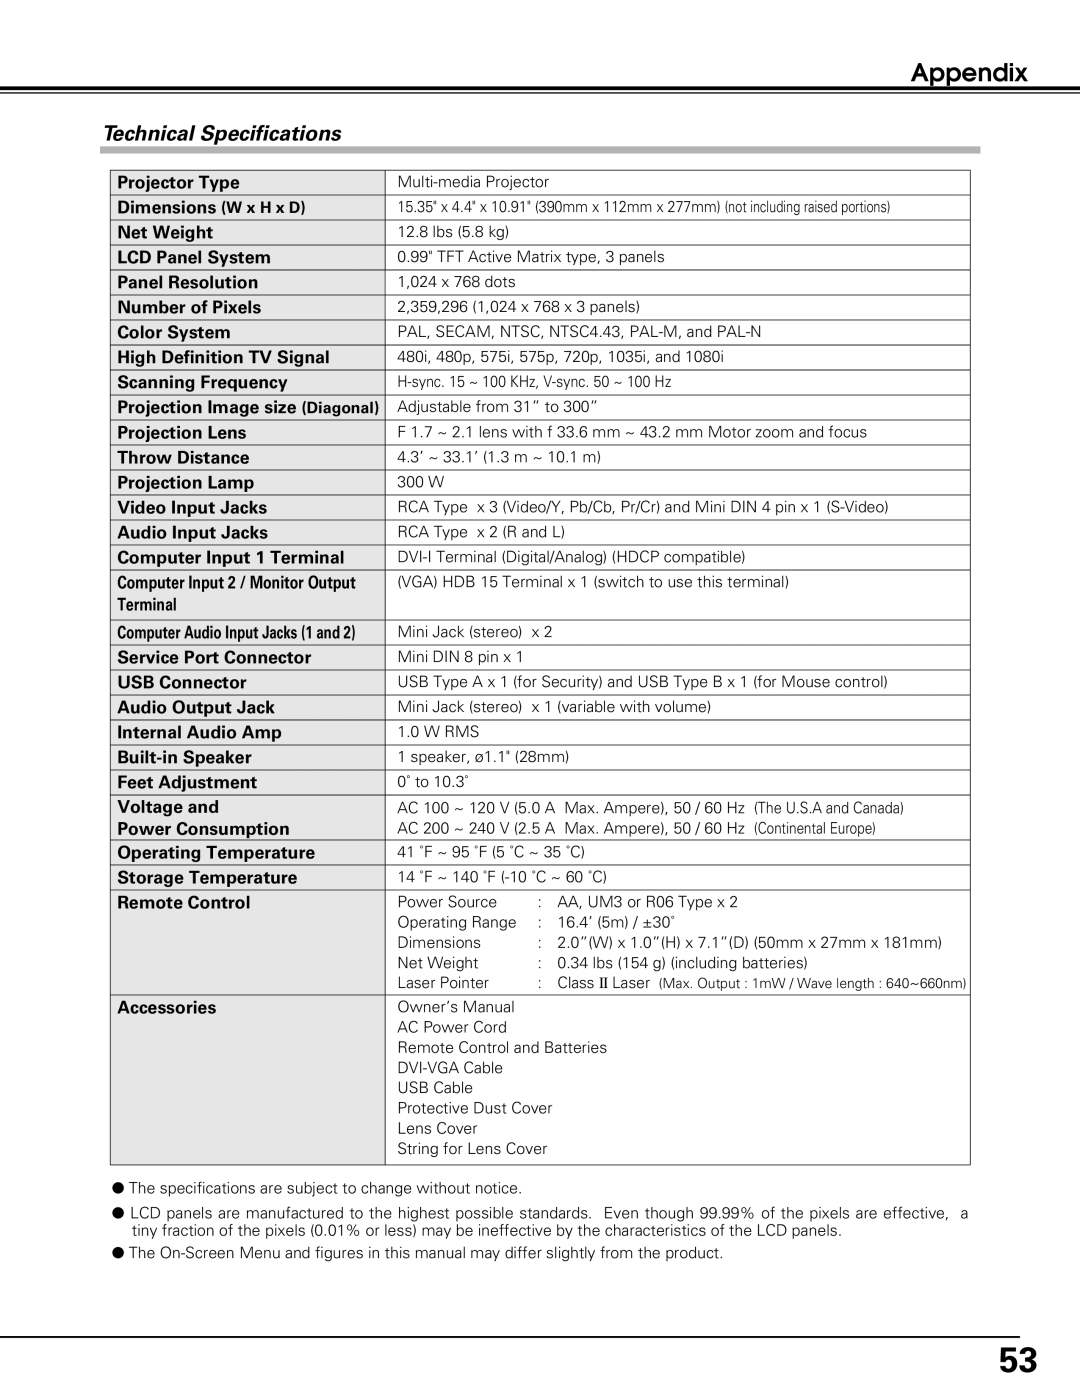 Black Box LC-XE10 instruction manual Technical Specifications, Appendix 